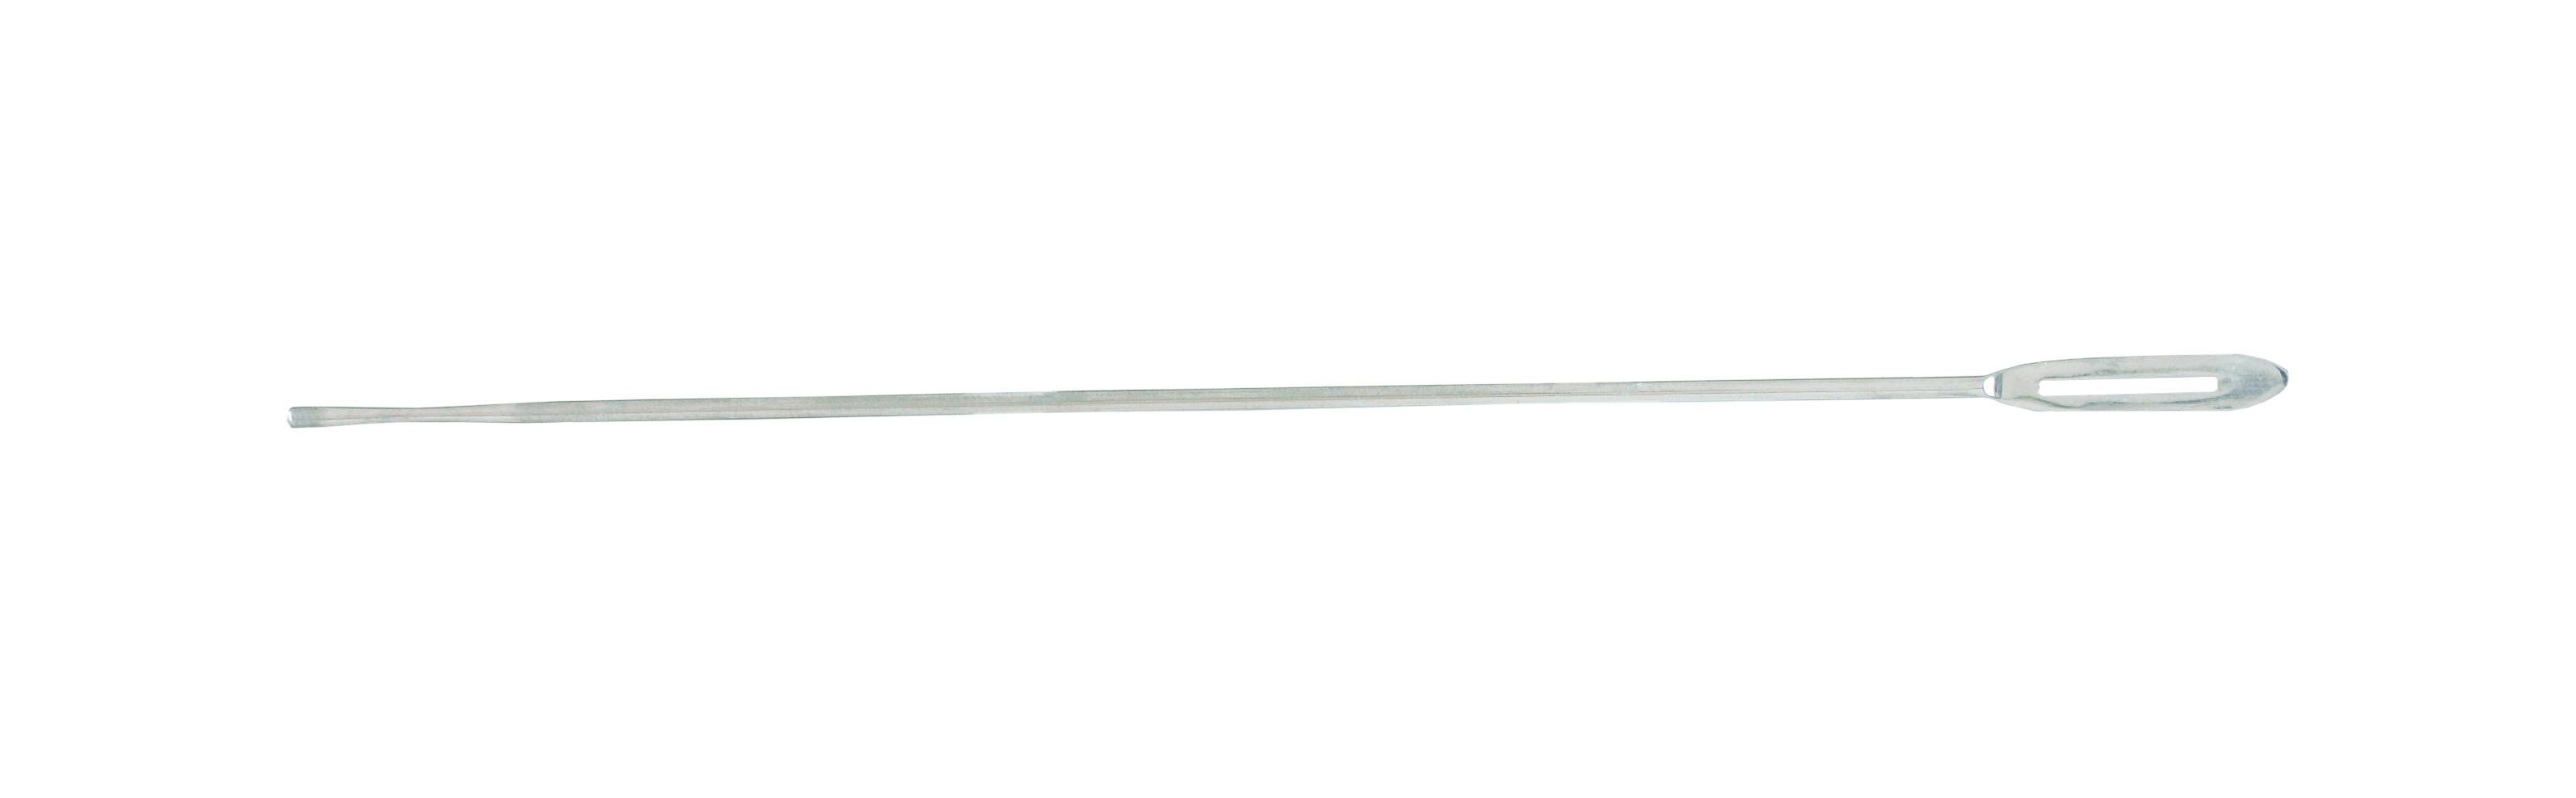 miltex-probes-with-eye-malleable-7-178-cm-stainless-10-30-ss-miltex.jpg